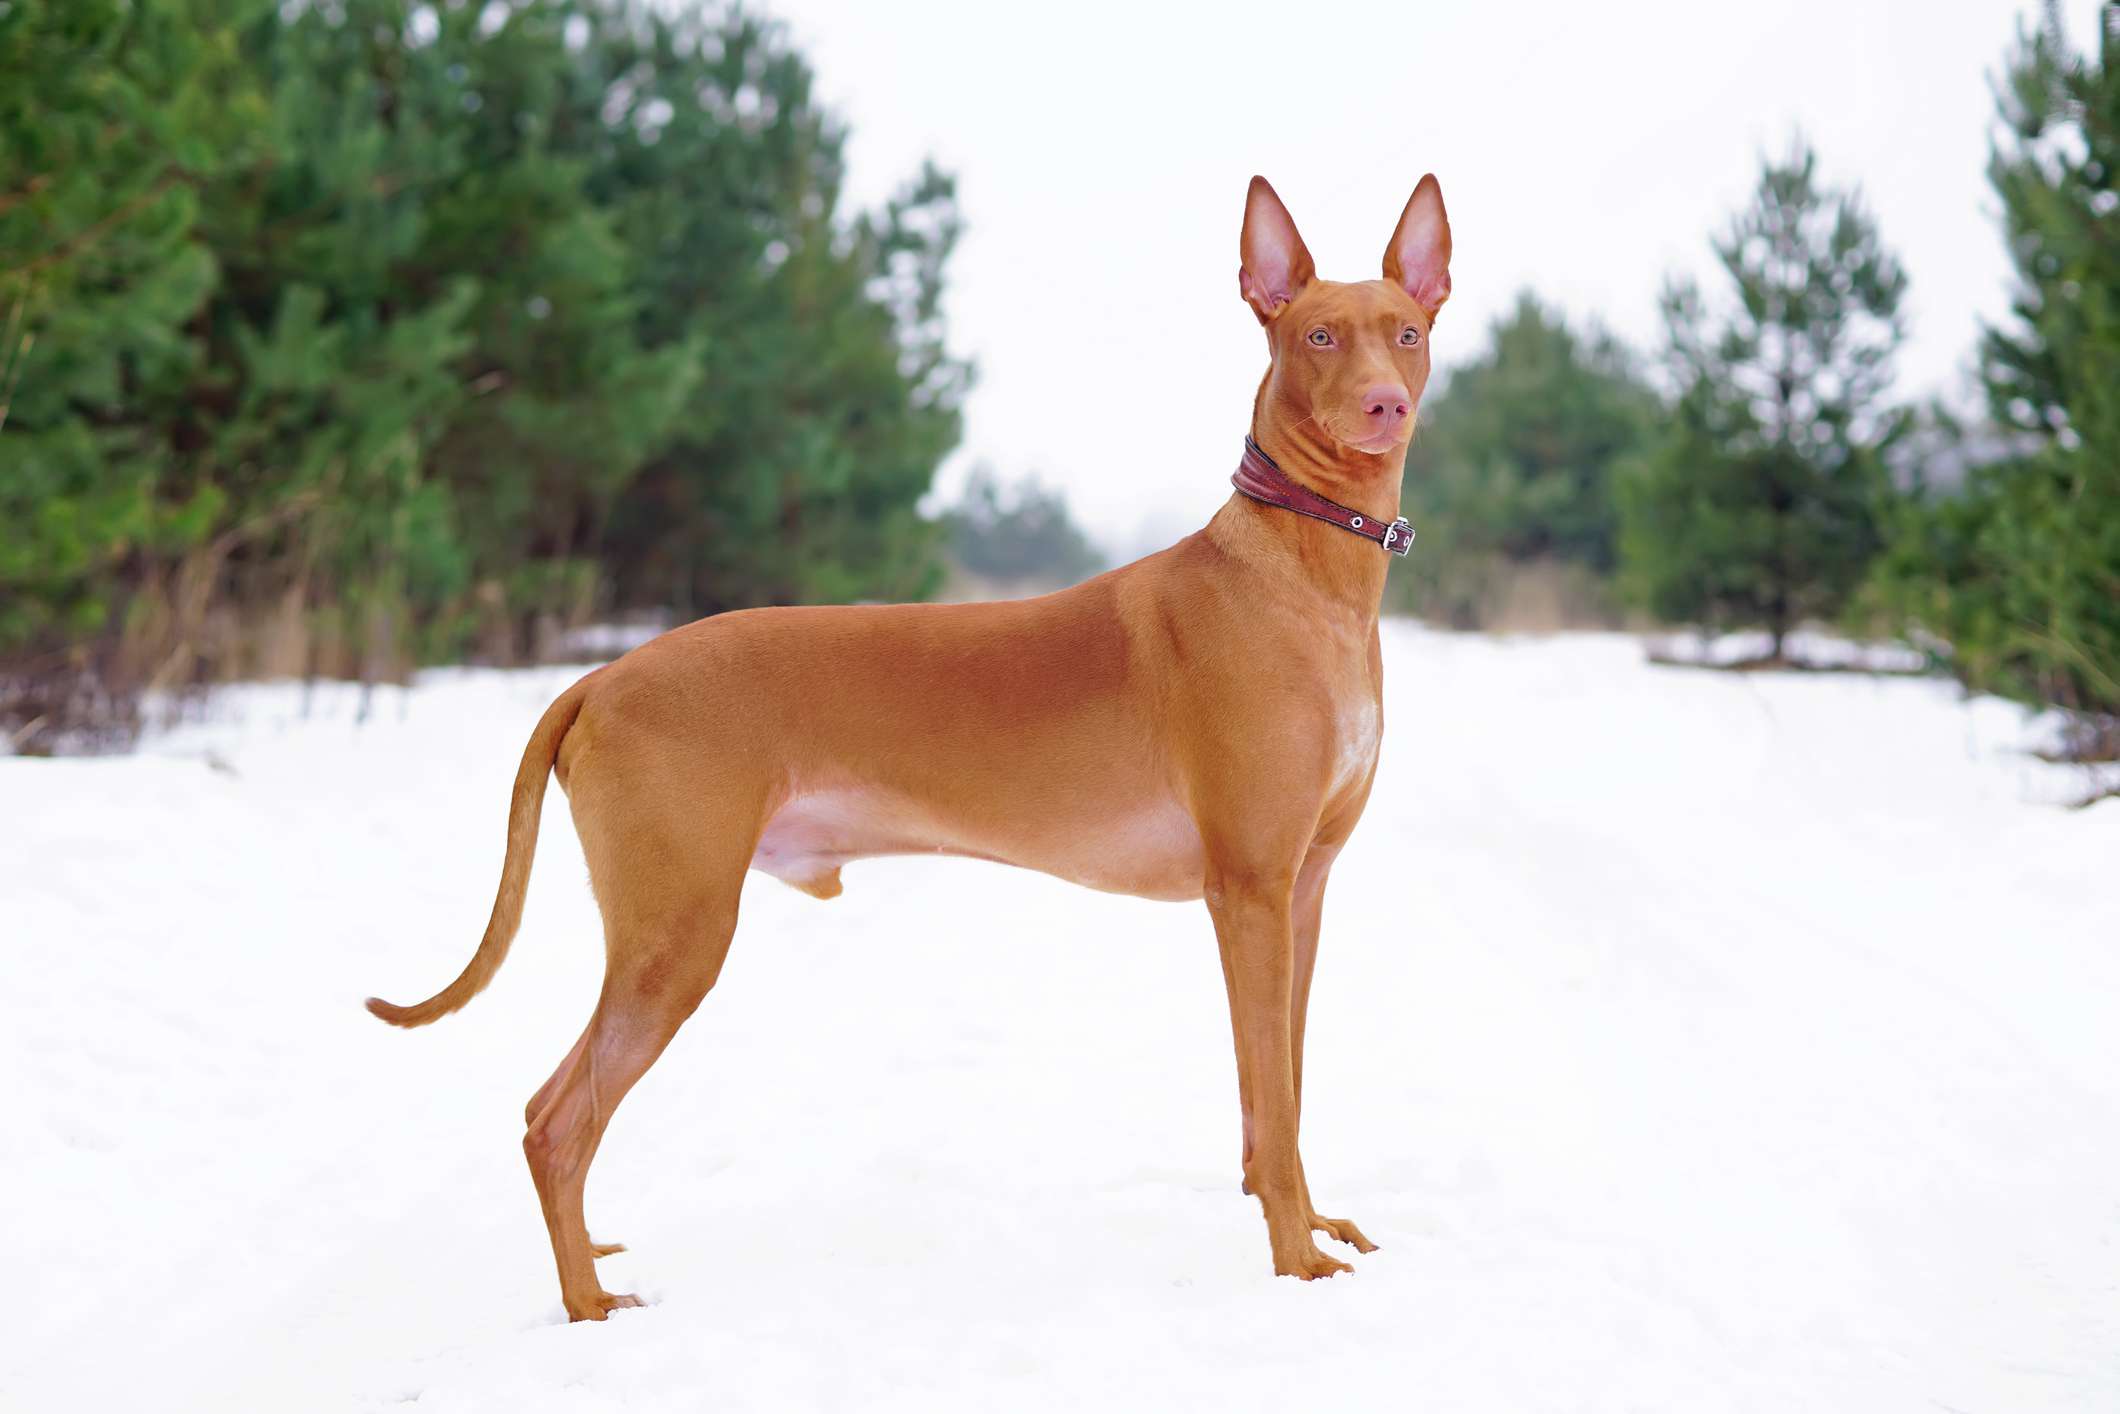 Pharaoh Hound standing in snow in a forest